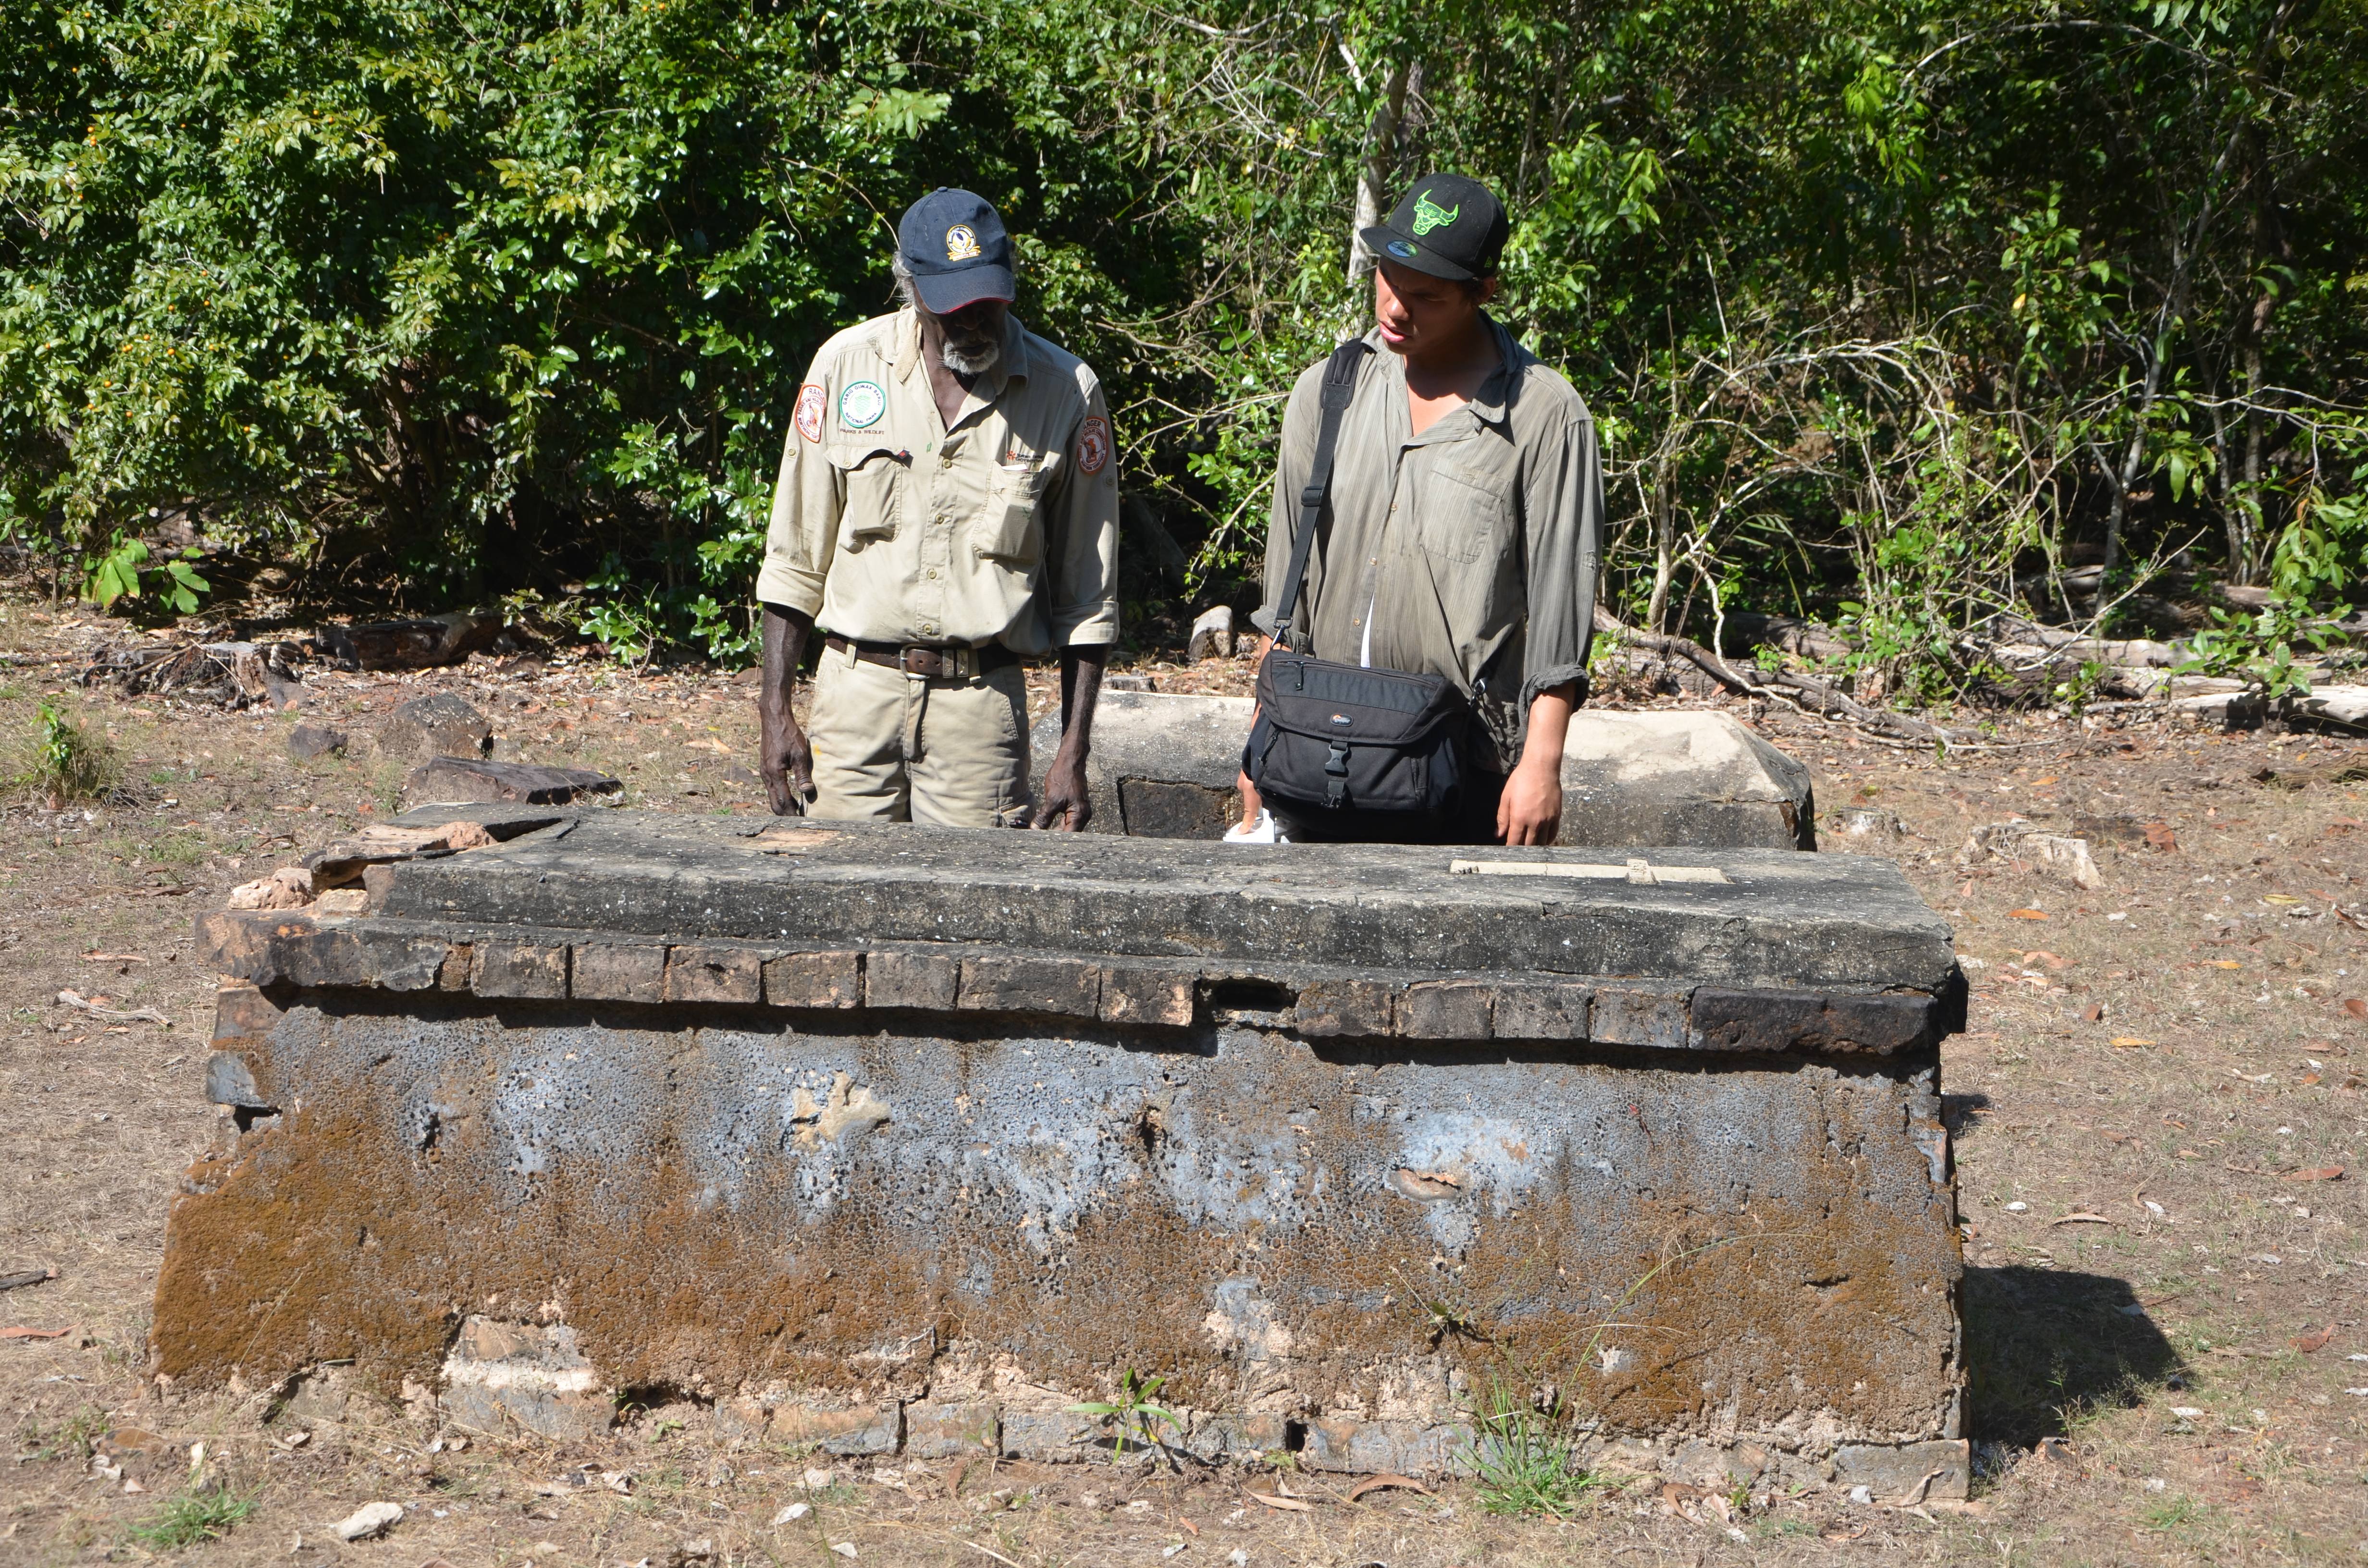 Depicts two Aboriginal men inspecting an above-ground brick tomb.